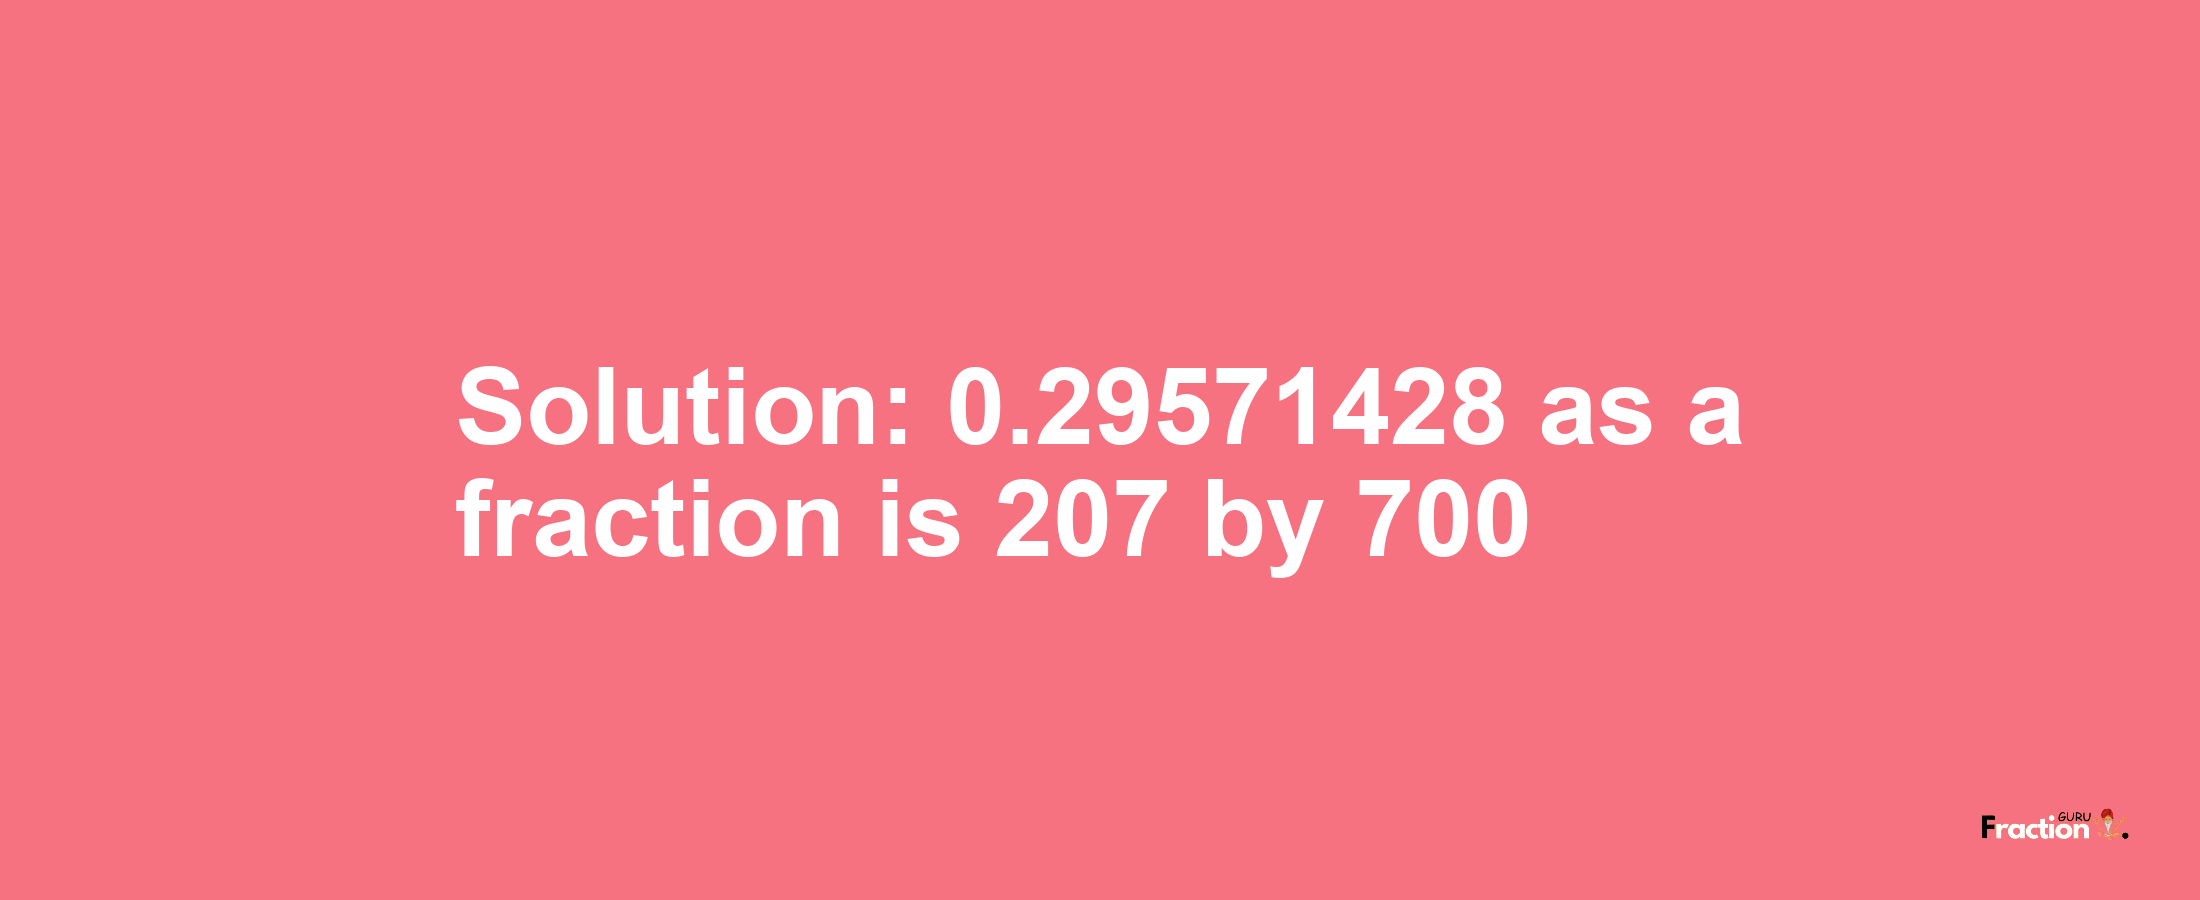 Solution:0.29571428 as a fraction is 207/700